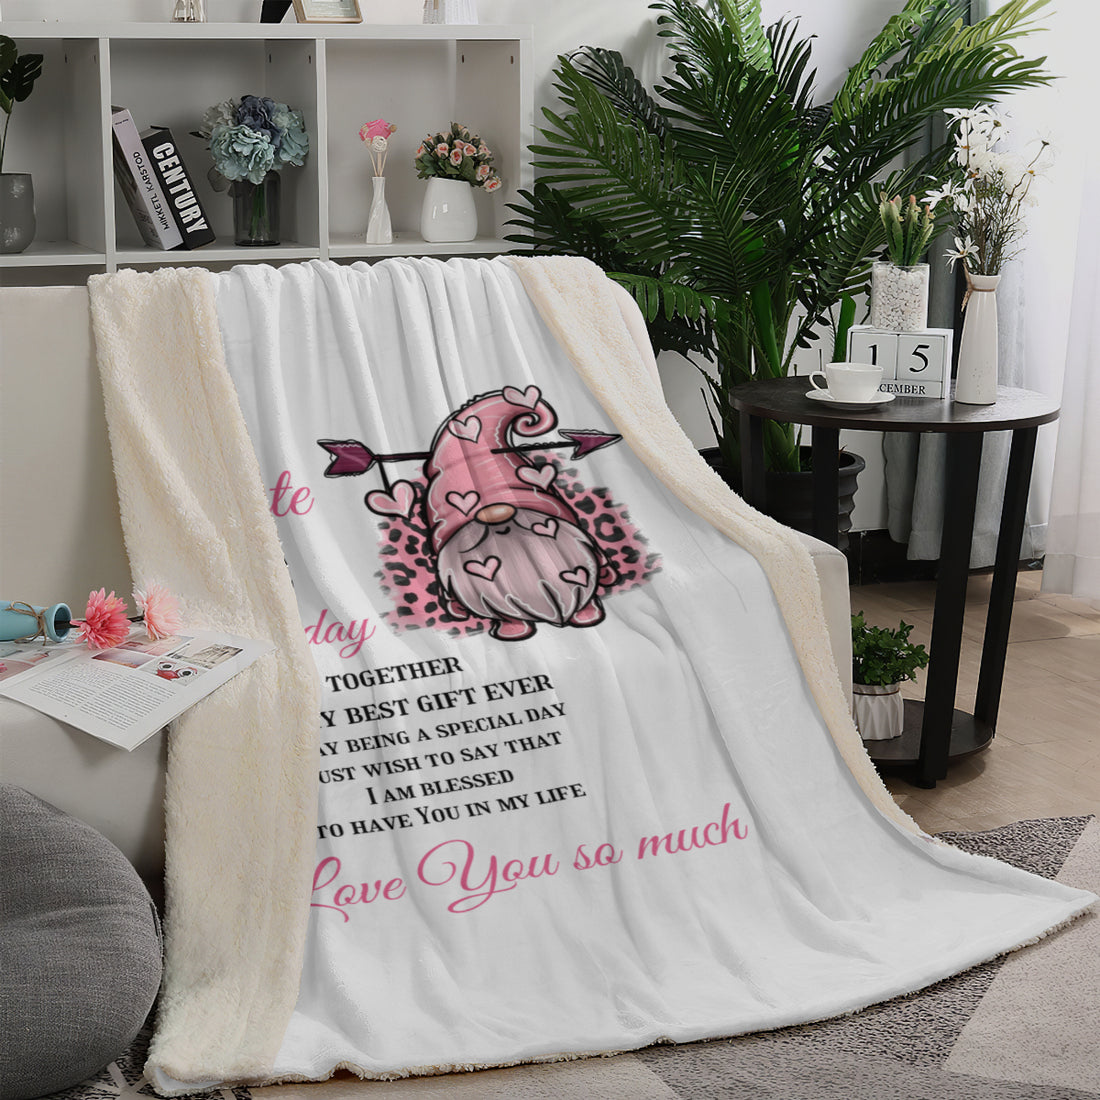 Blanket To my Soulmate Home-clothes-jewelry